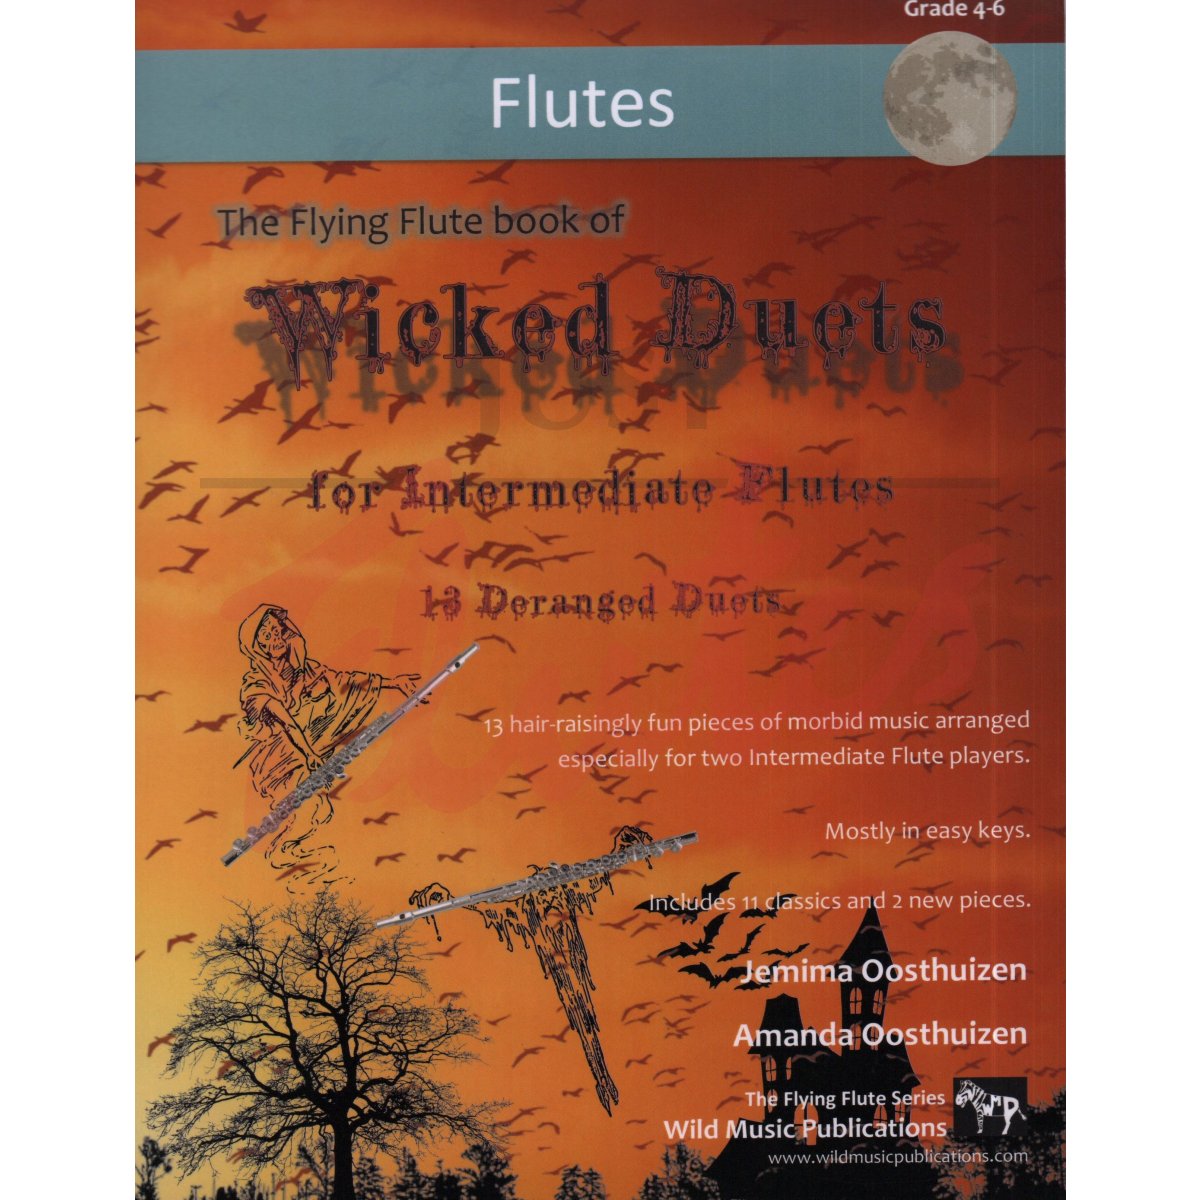 The Flying Flute Book of Wicked Duets for Two Intermediate Flutes